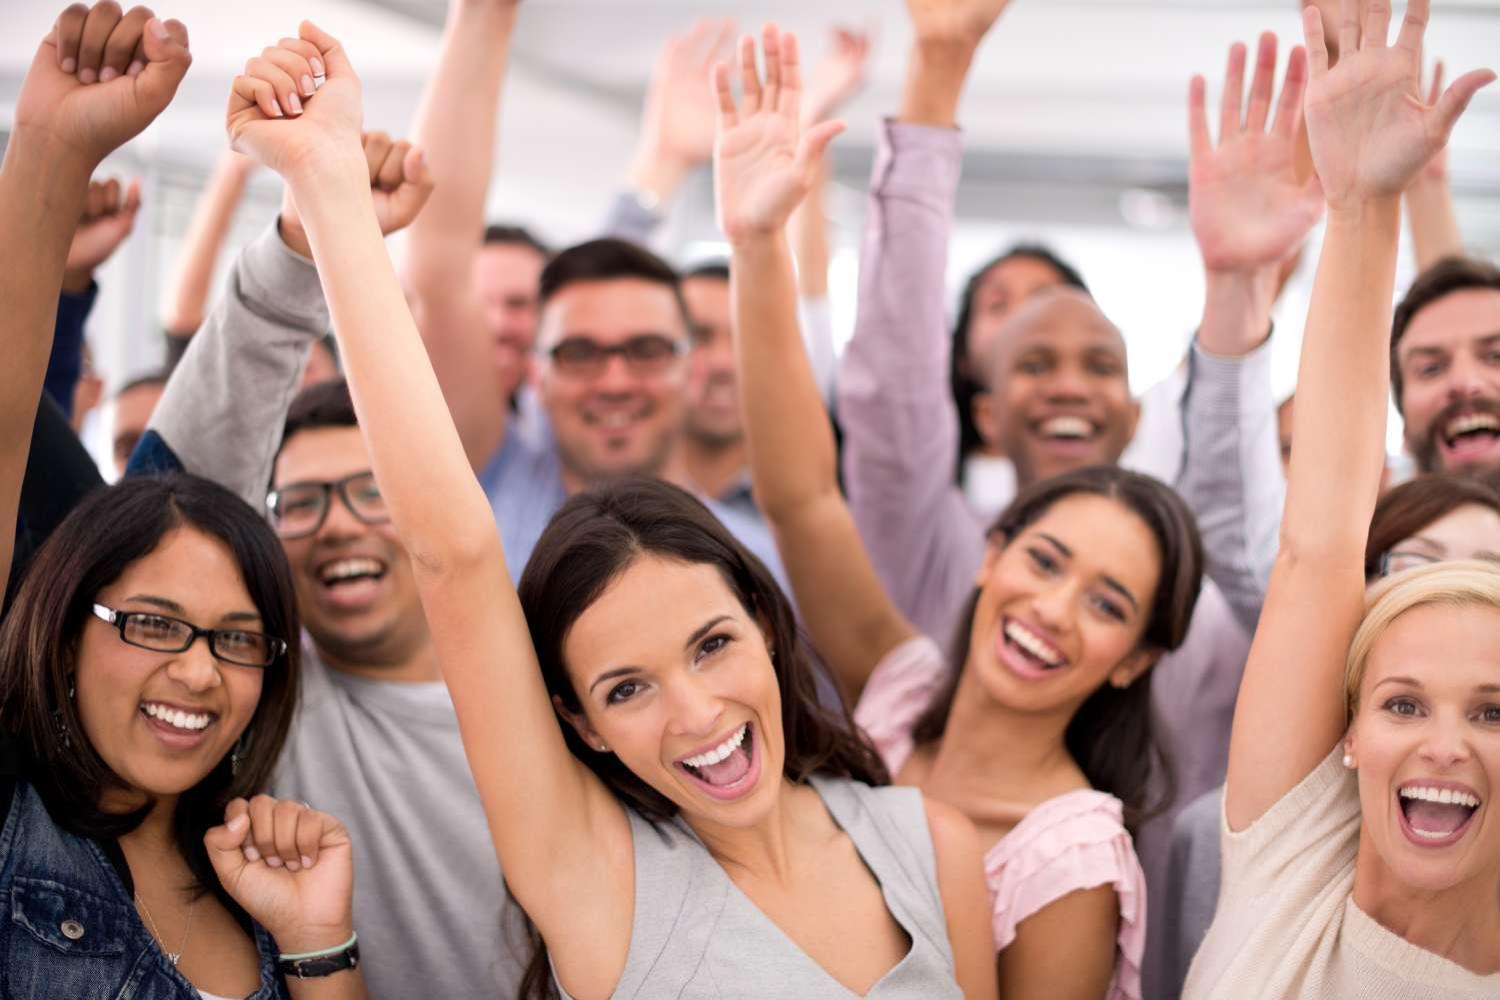 Shot of a group of smiling businesspeople raising their hands together